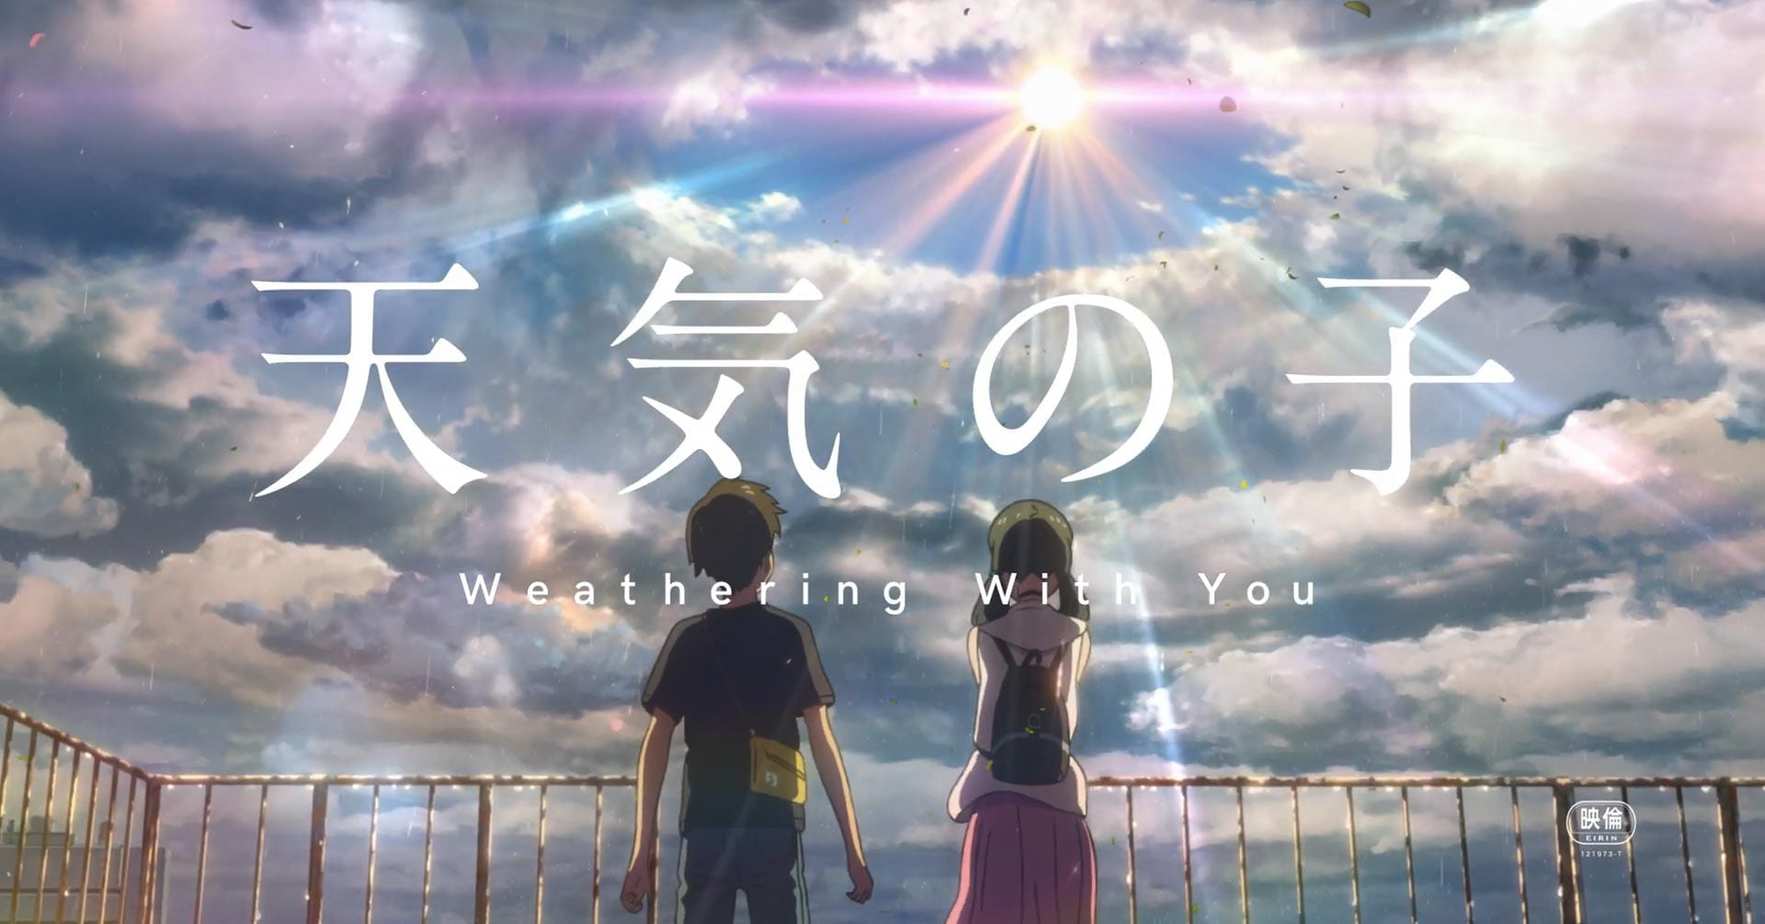 Weathering with you - must watch anime film